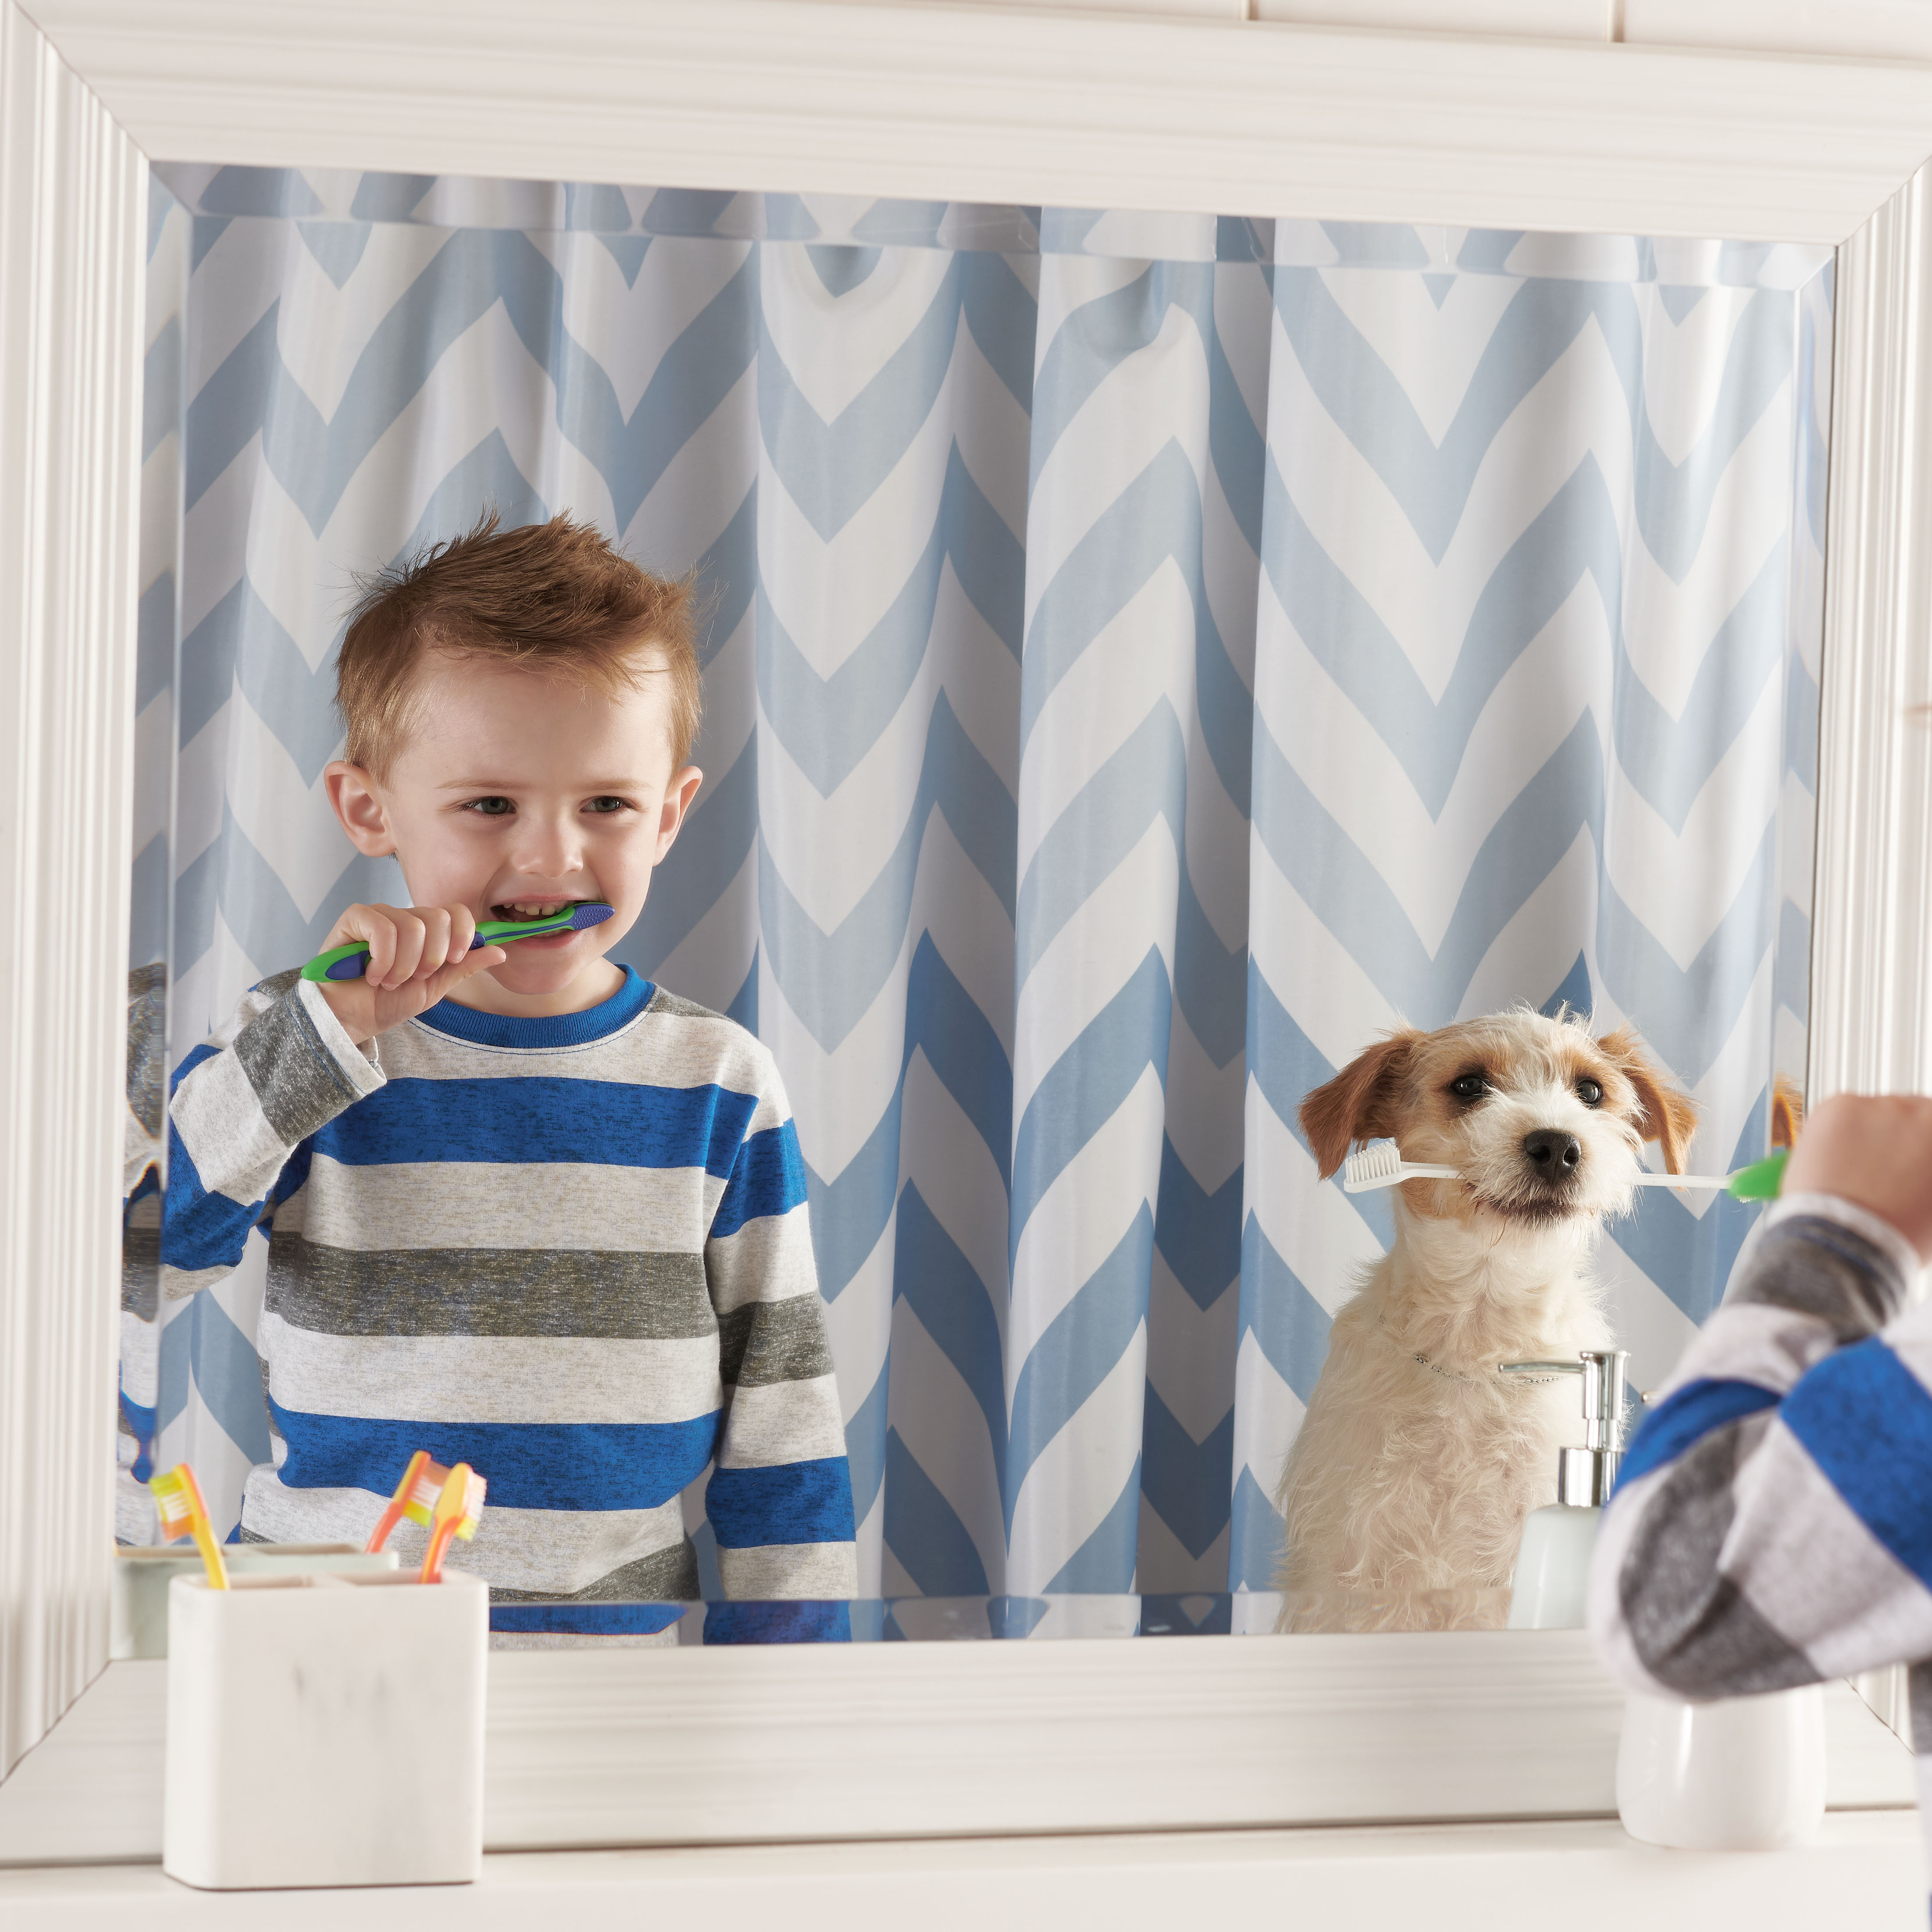 Young child brushing teeth in mirror with dog for Walmart by Alison Gootee Photography